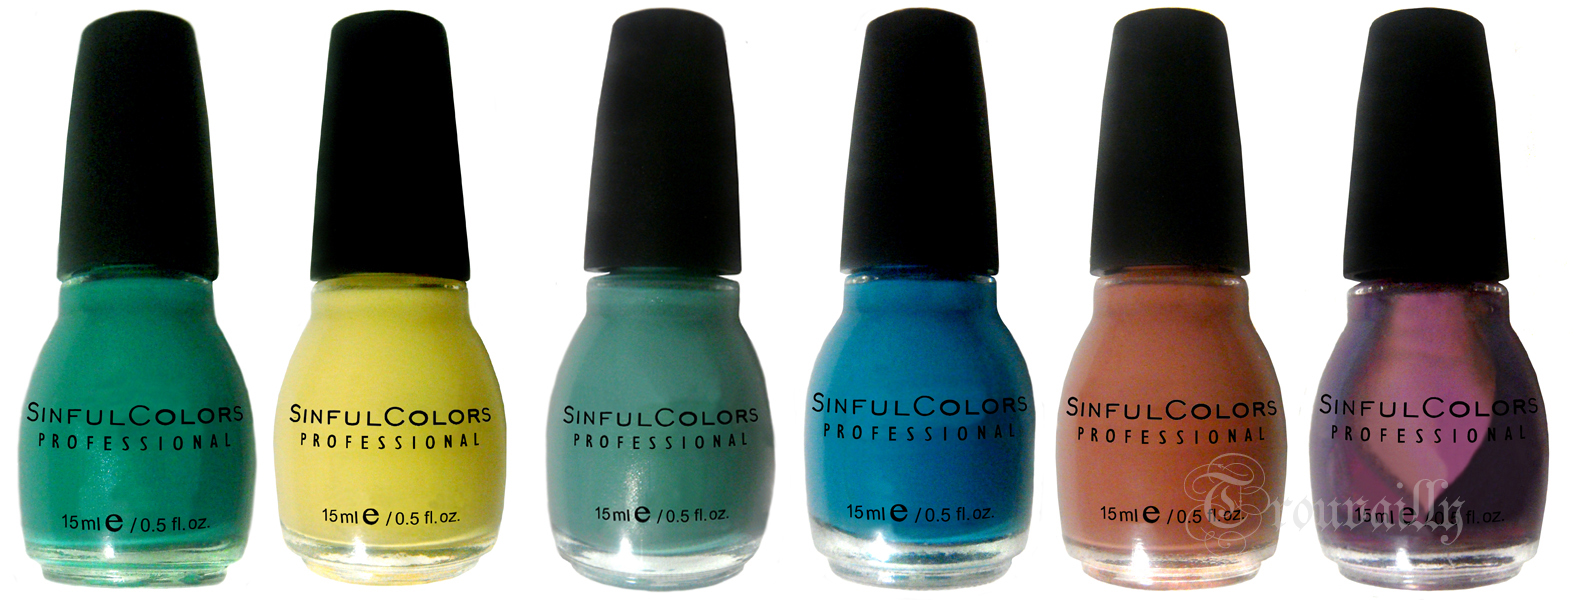 8. Sinful Colors Professional Nail Polish in "Color Illusion" - wide 5